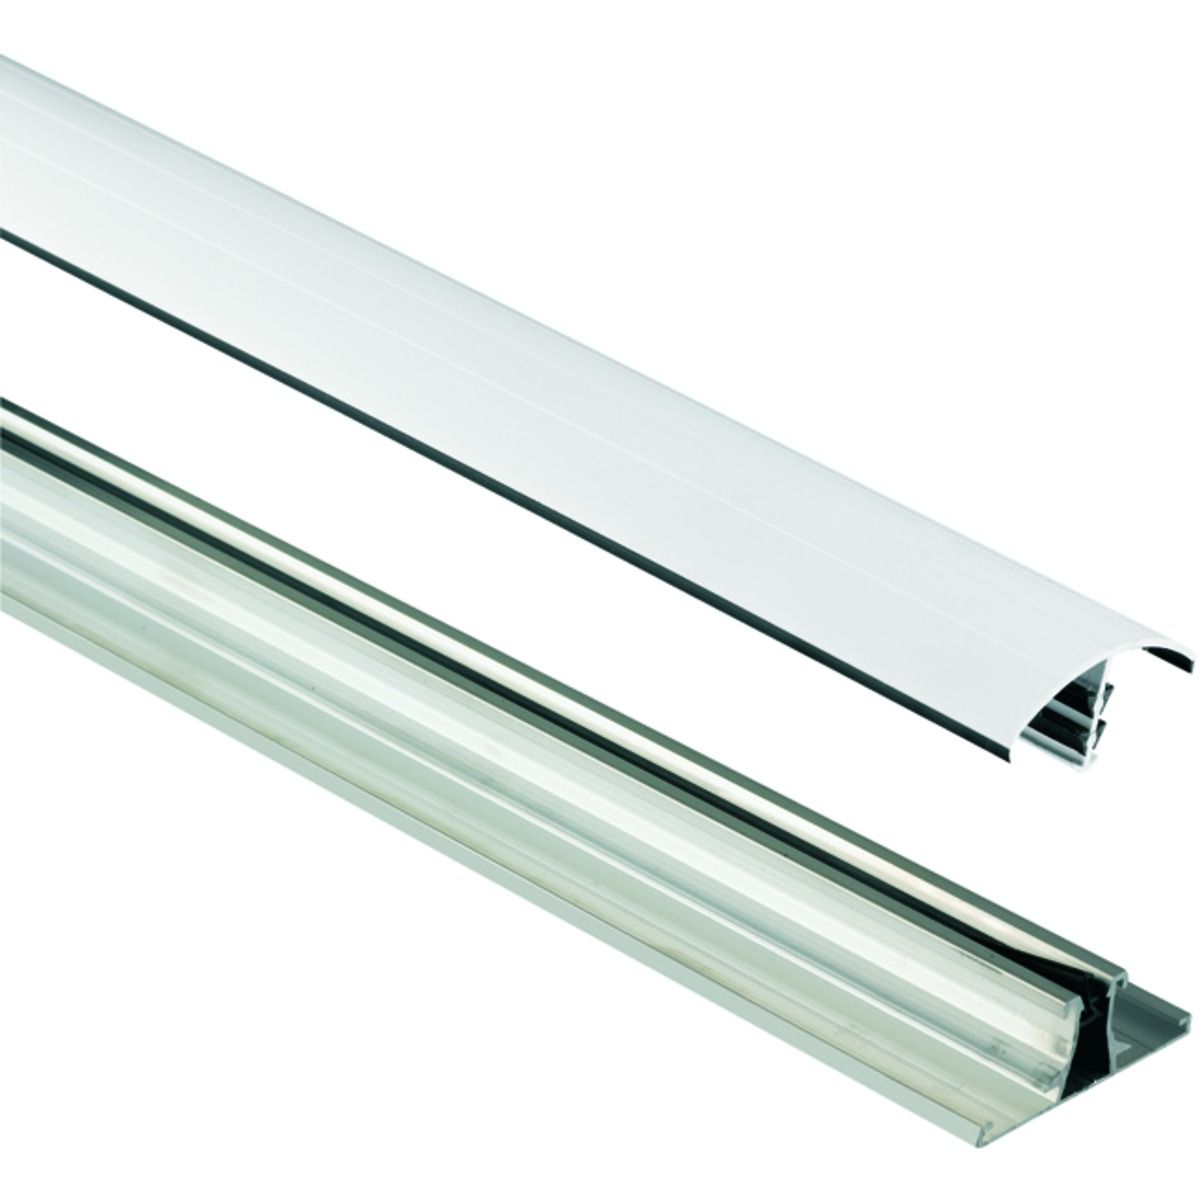 Image of Wickes White Universal Glazing Bar for Polycarbonate Sheets - 3m